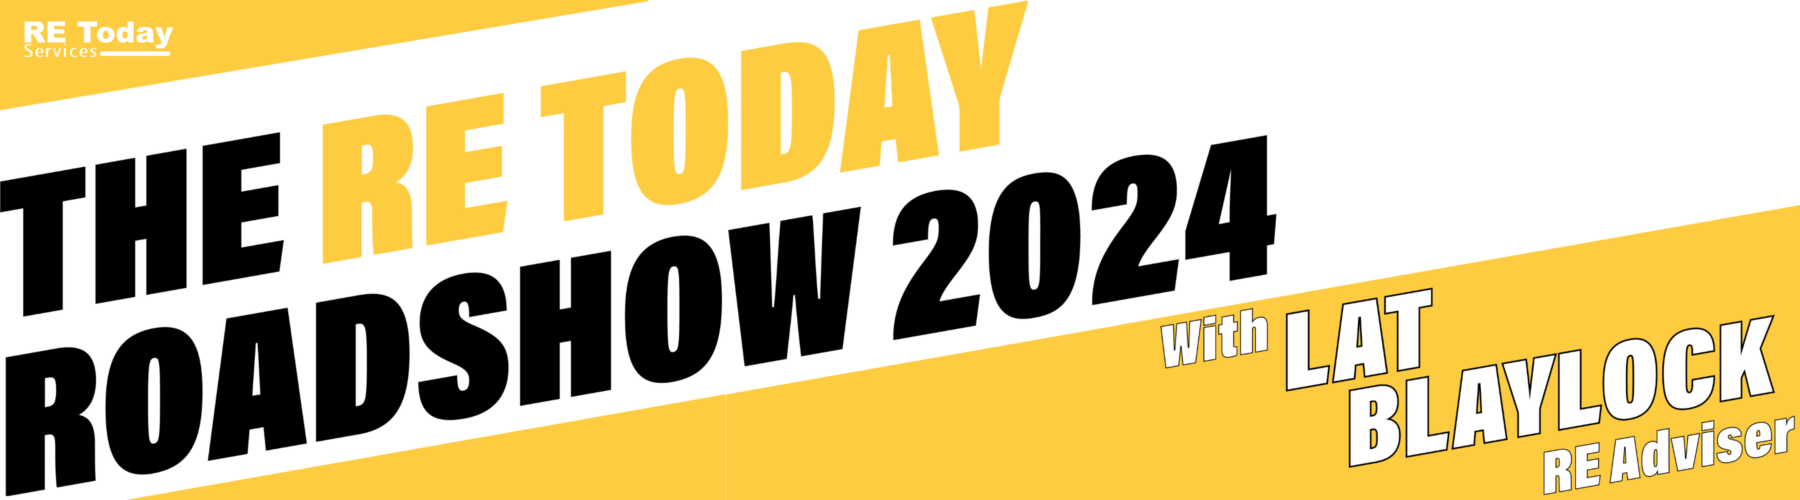 RE Today Roadshow 2024: Educate, Equip, Empower with Lat Blaylock